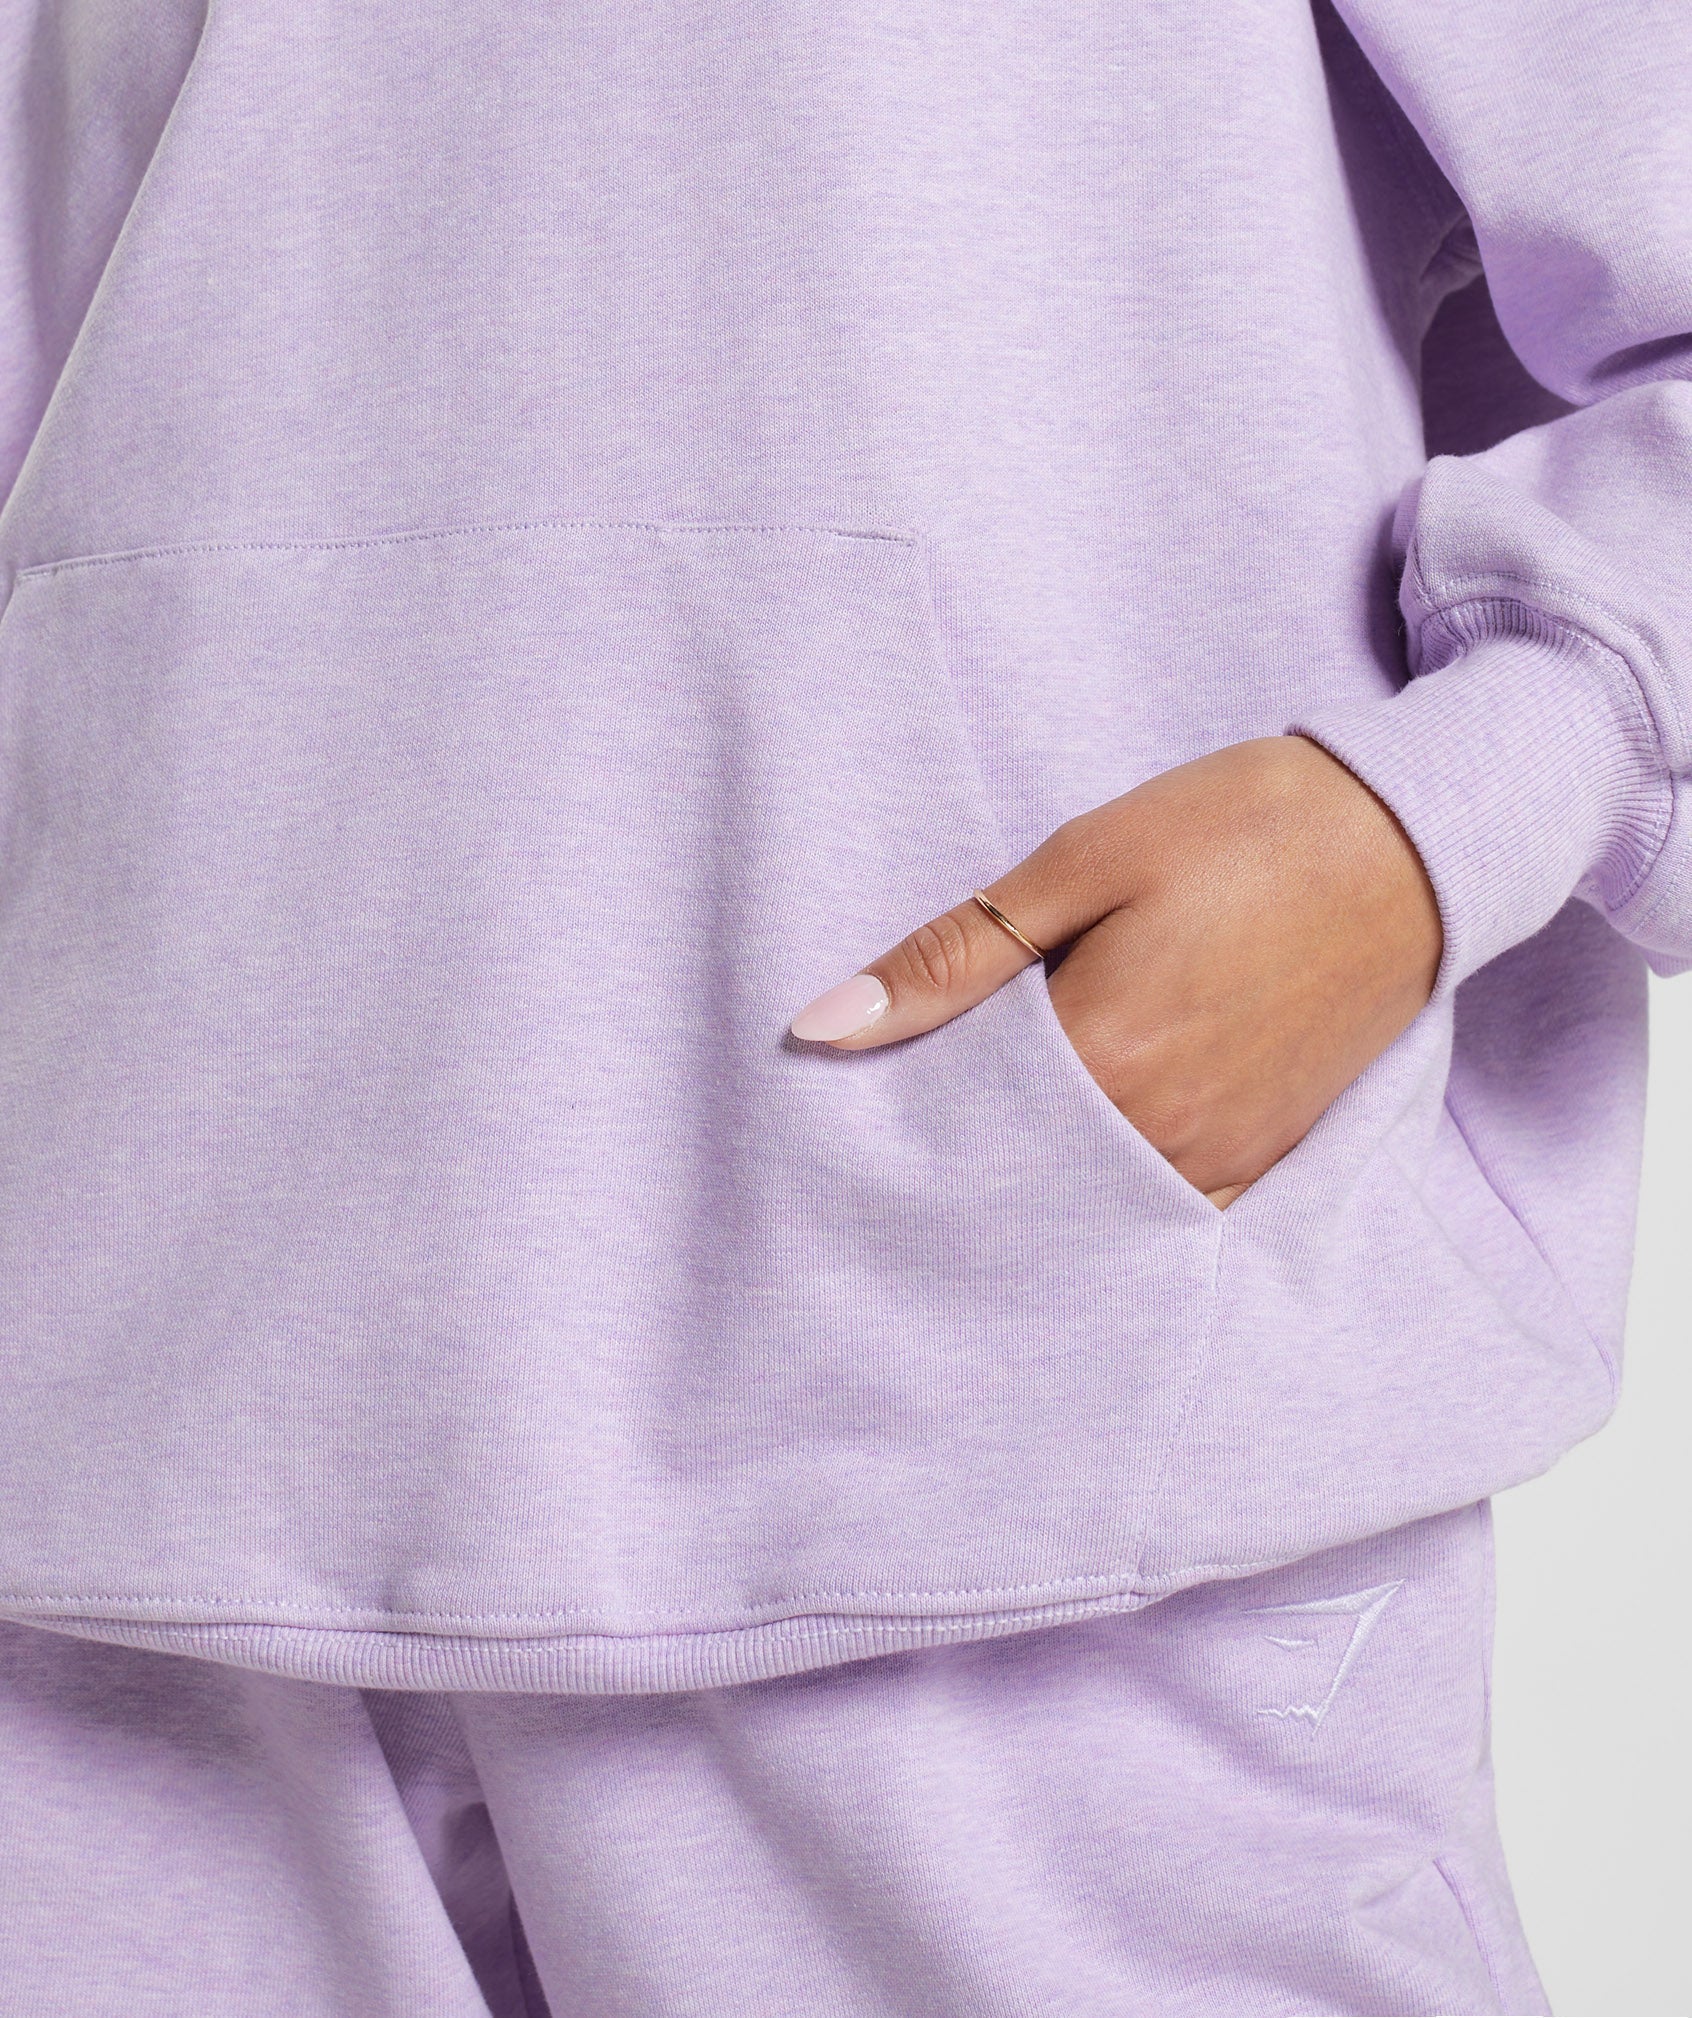 Rest Day Sweats Hoodie in Aura Lilac Marl - view 7